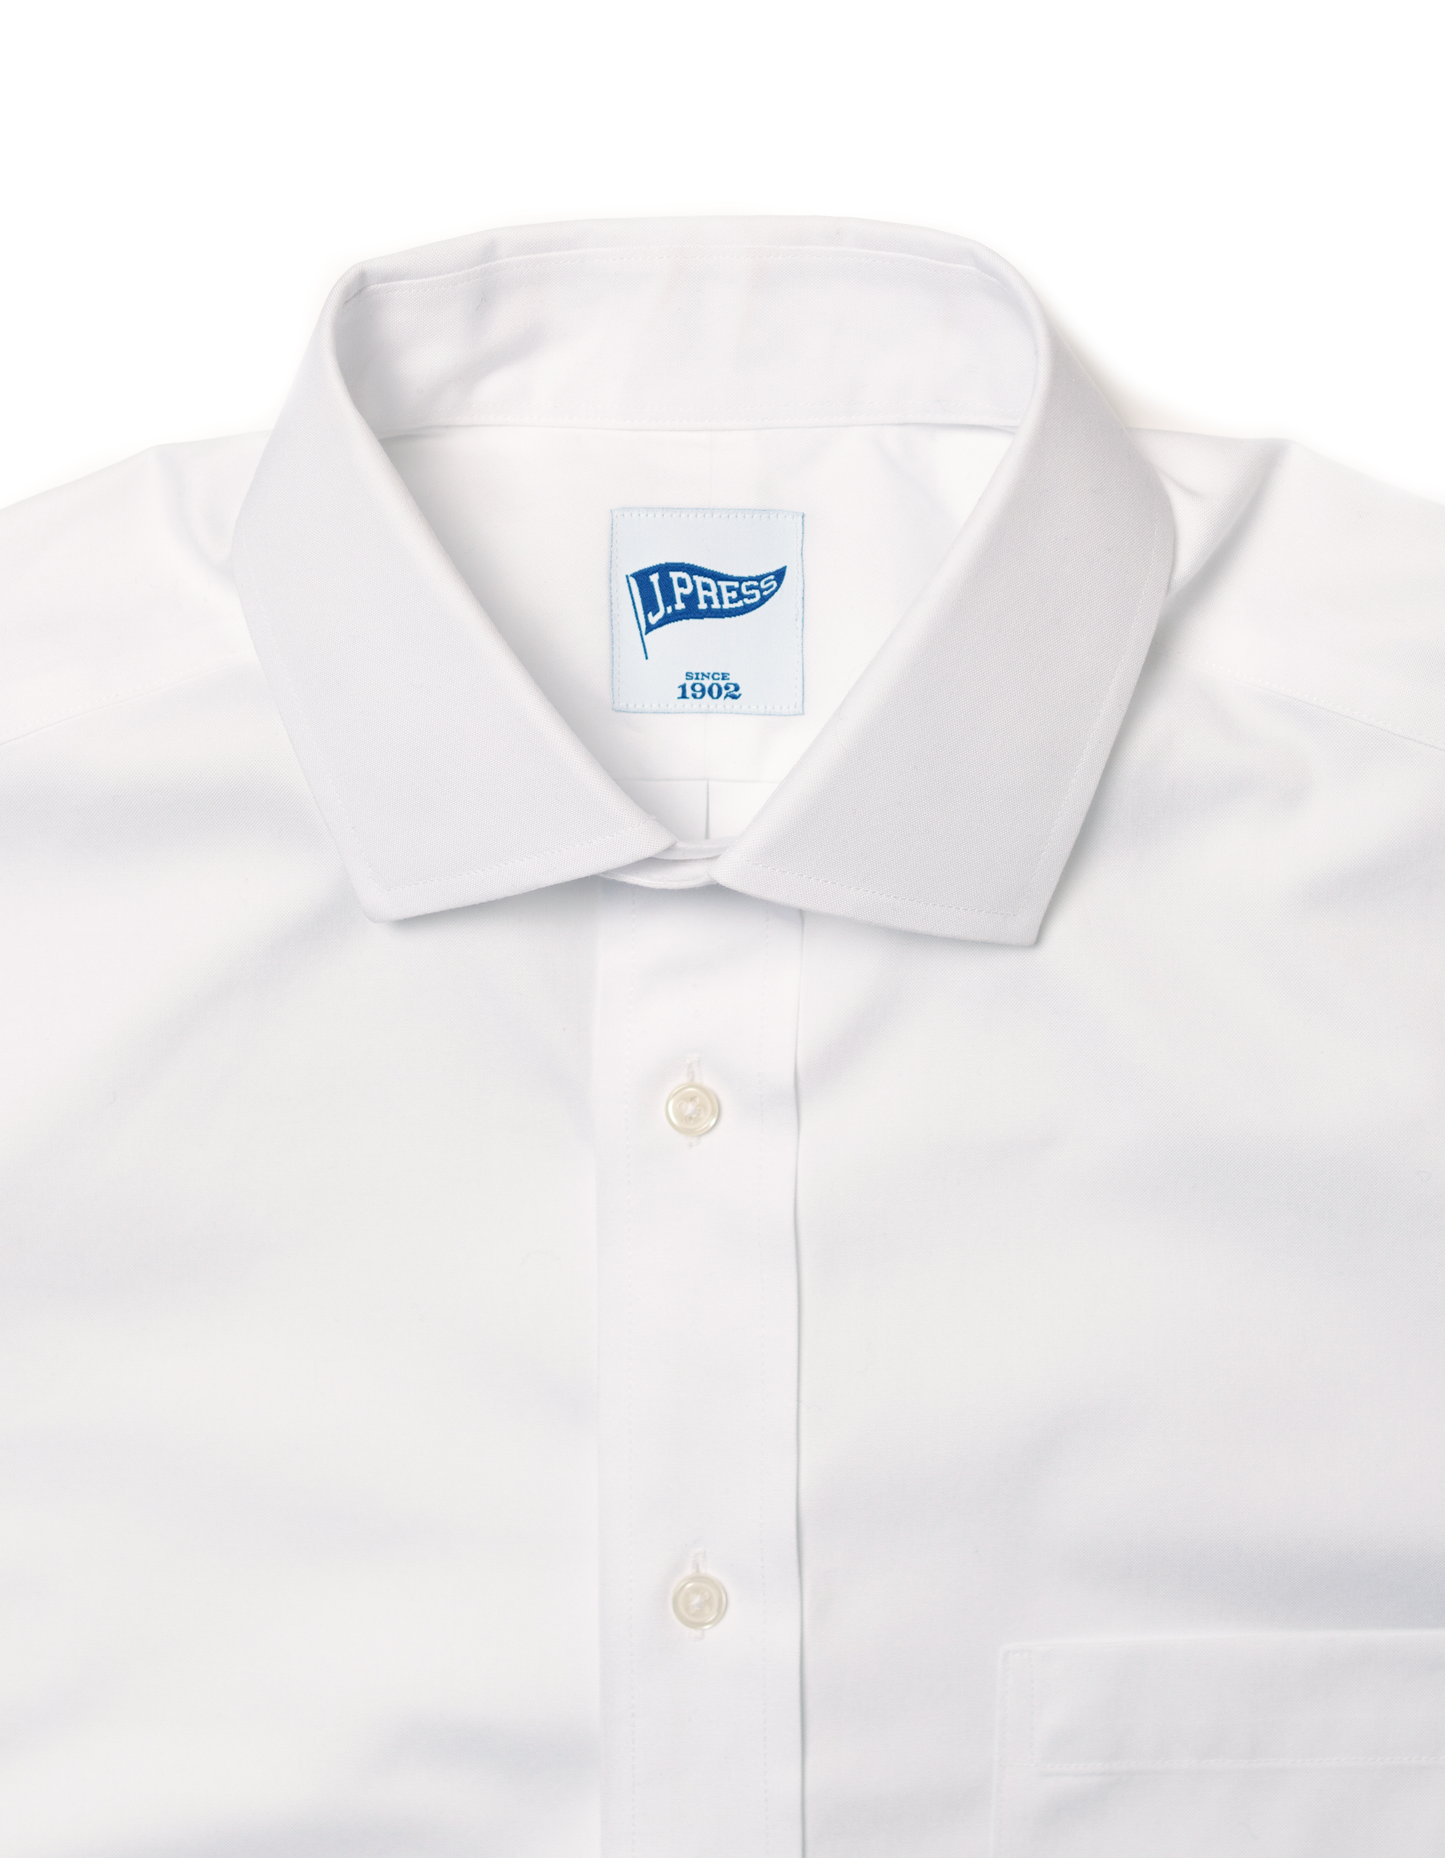 WHITE PINPOINT SPREAD COLLAR SHIRT - TRIM FIT